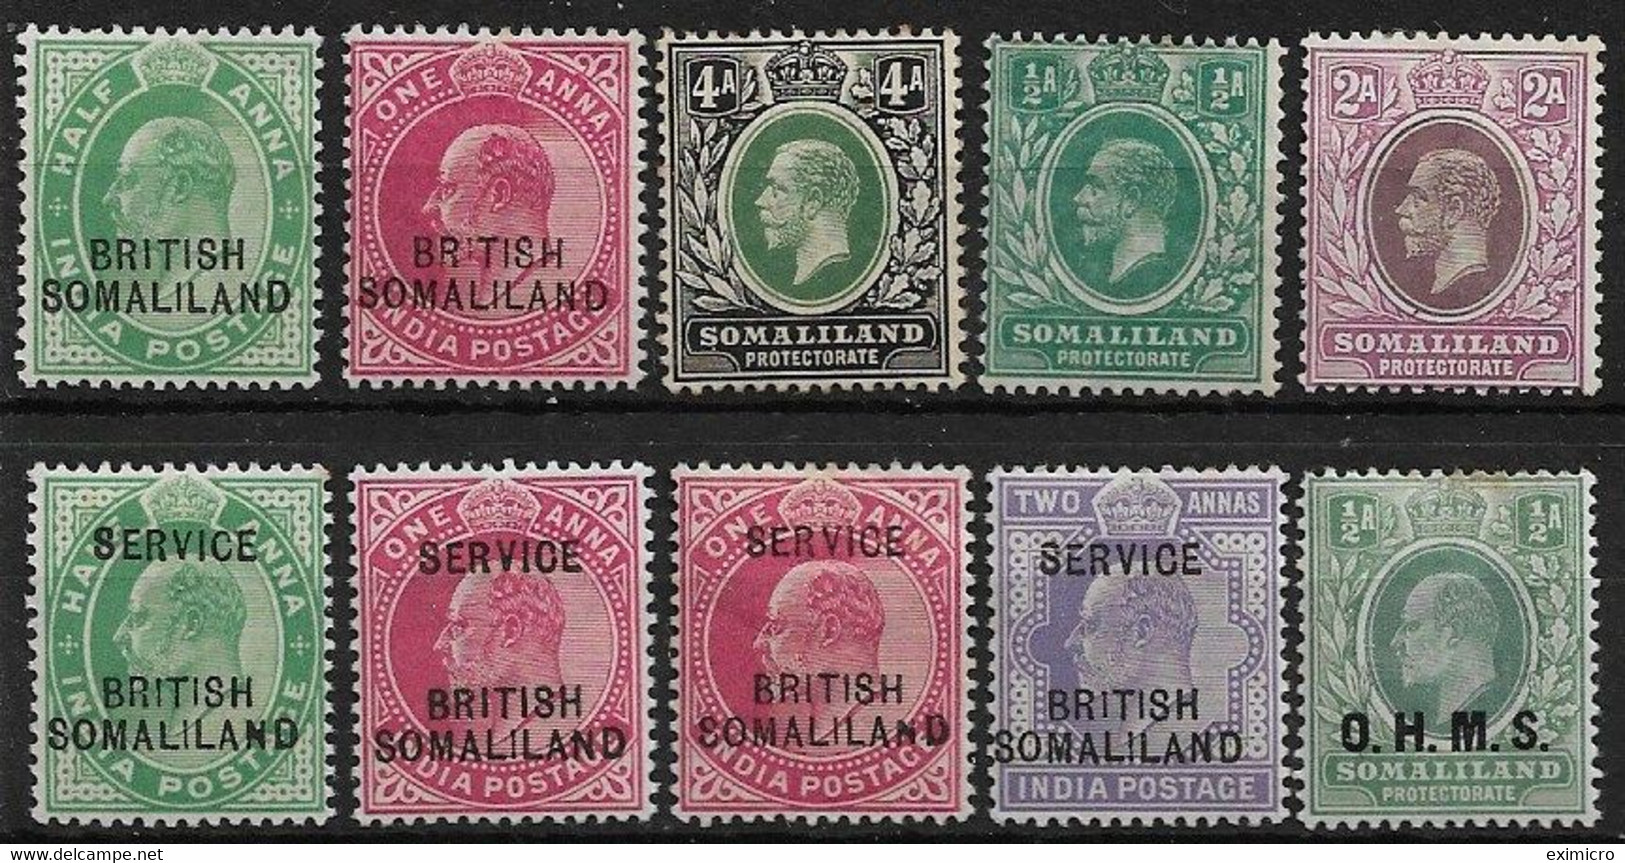 SOMALILAND 1903 - 1921 ALL DIFFERENT SELECTION INCLUDING AN UNLISTED VARIETY UNMOUNTED MINT/ MOUNTED MINT Cat £27+ - Somaliland (Protectorate ...-1959)